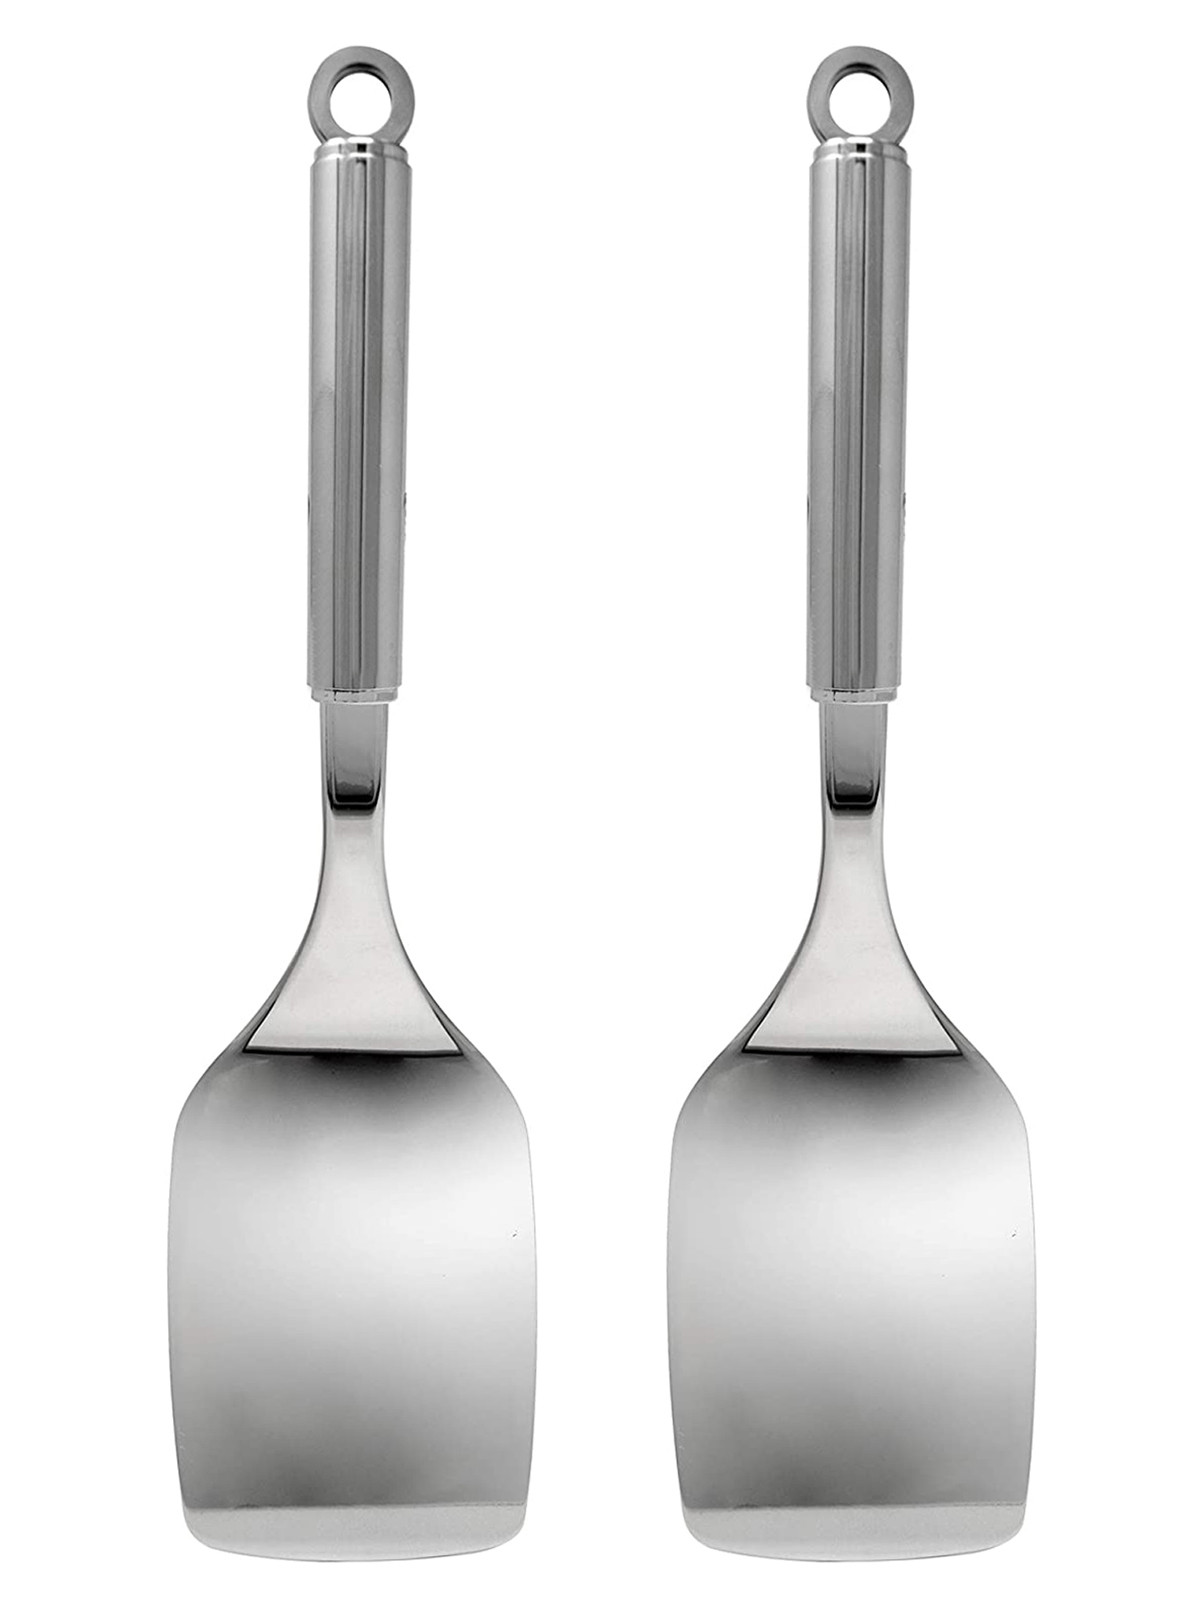 Kuber Industries Stainless Steel Turners/Spatulas/Cooking Turner/for Dosa, Roti, Omlette, Parathas, PavBhaji (Silver)